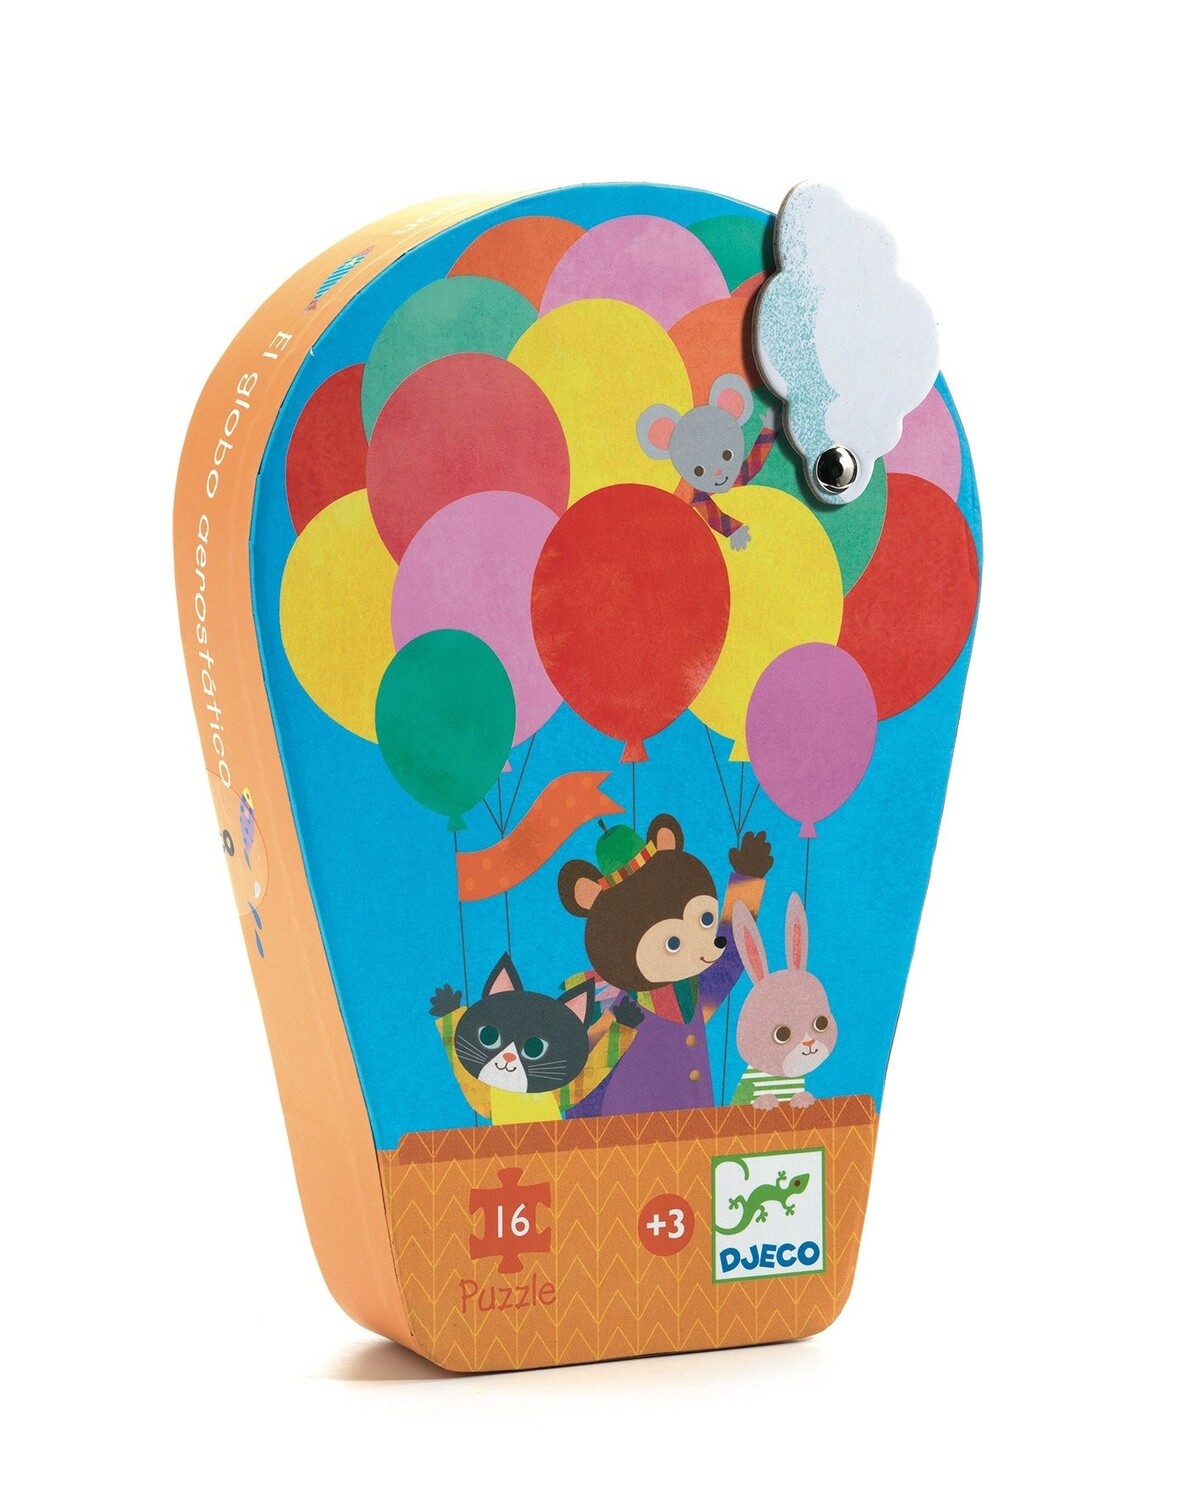 Djeco Silhouette Puzzle - Hot Air Balloon (16 pc)